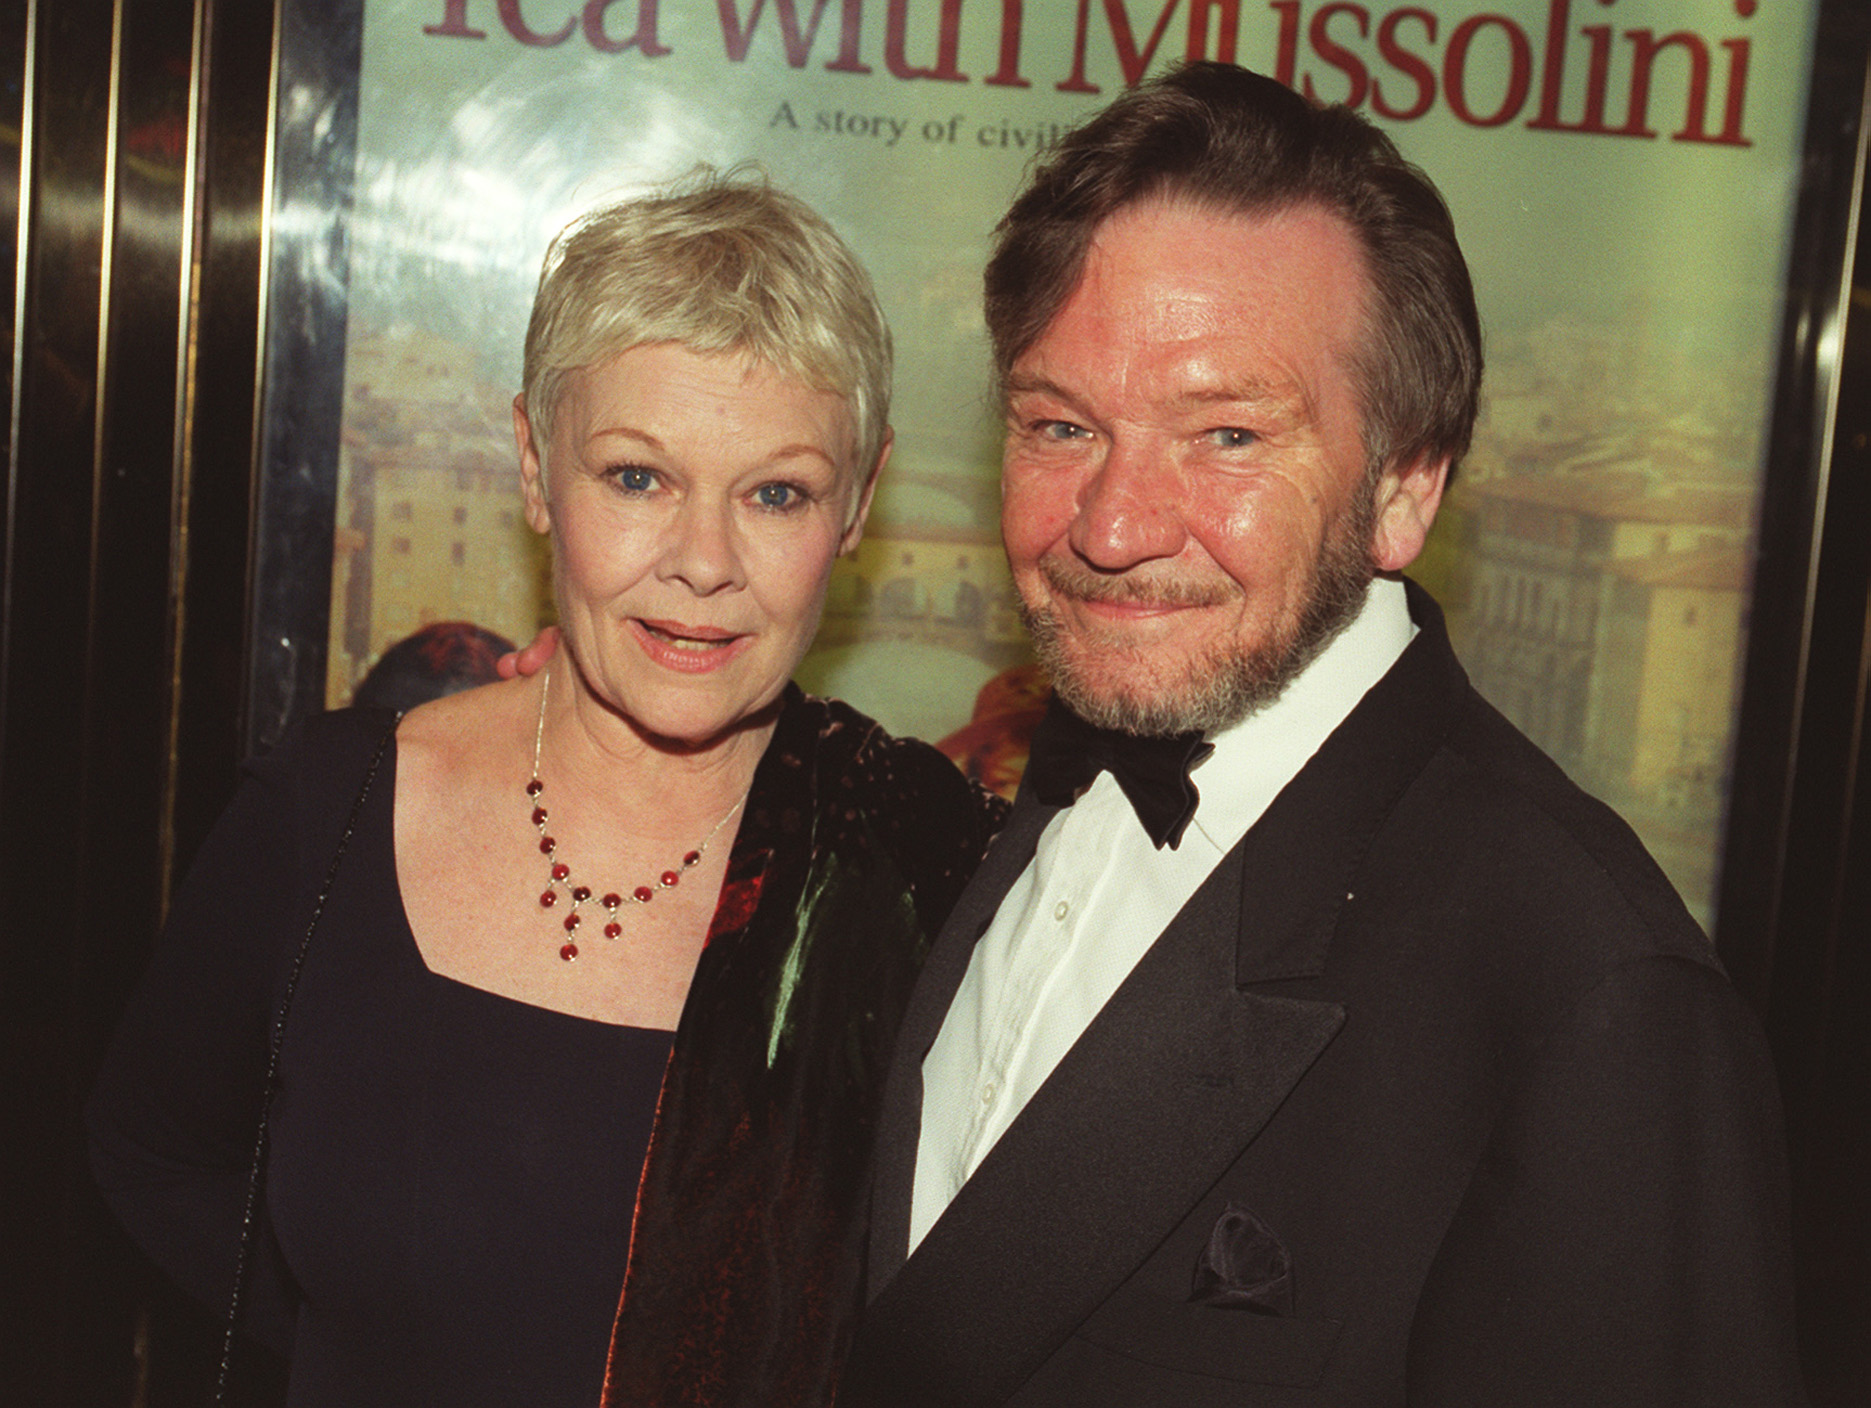 Dame Judi Dench and Michael Williams at the Royal Premiere of her film "Tea With Mussolini," at the Empire Leicester Square in London on March 18, 1999. | Source: Getty Images